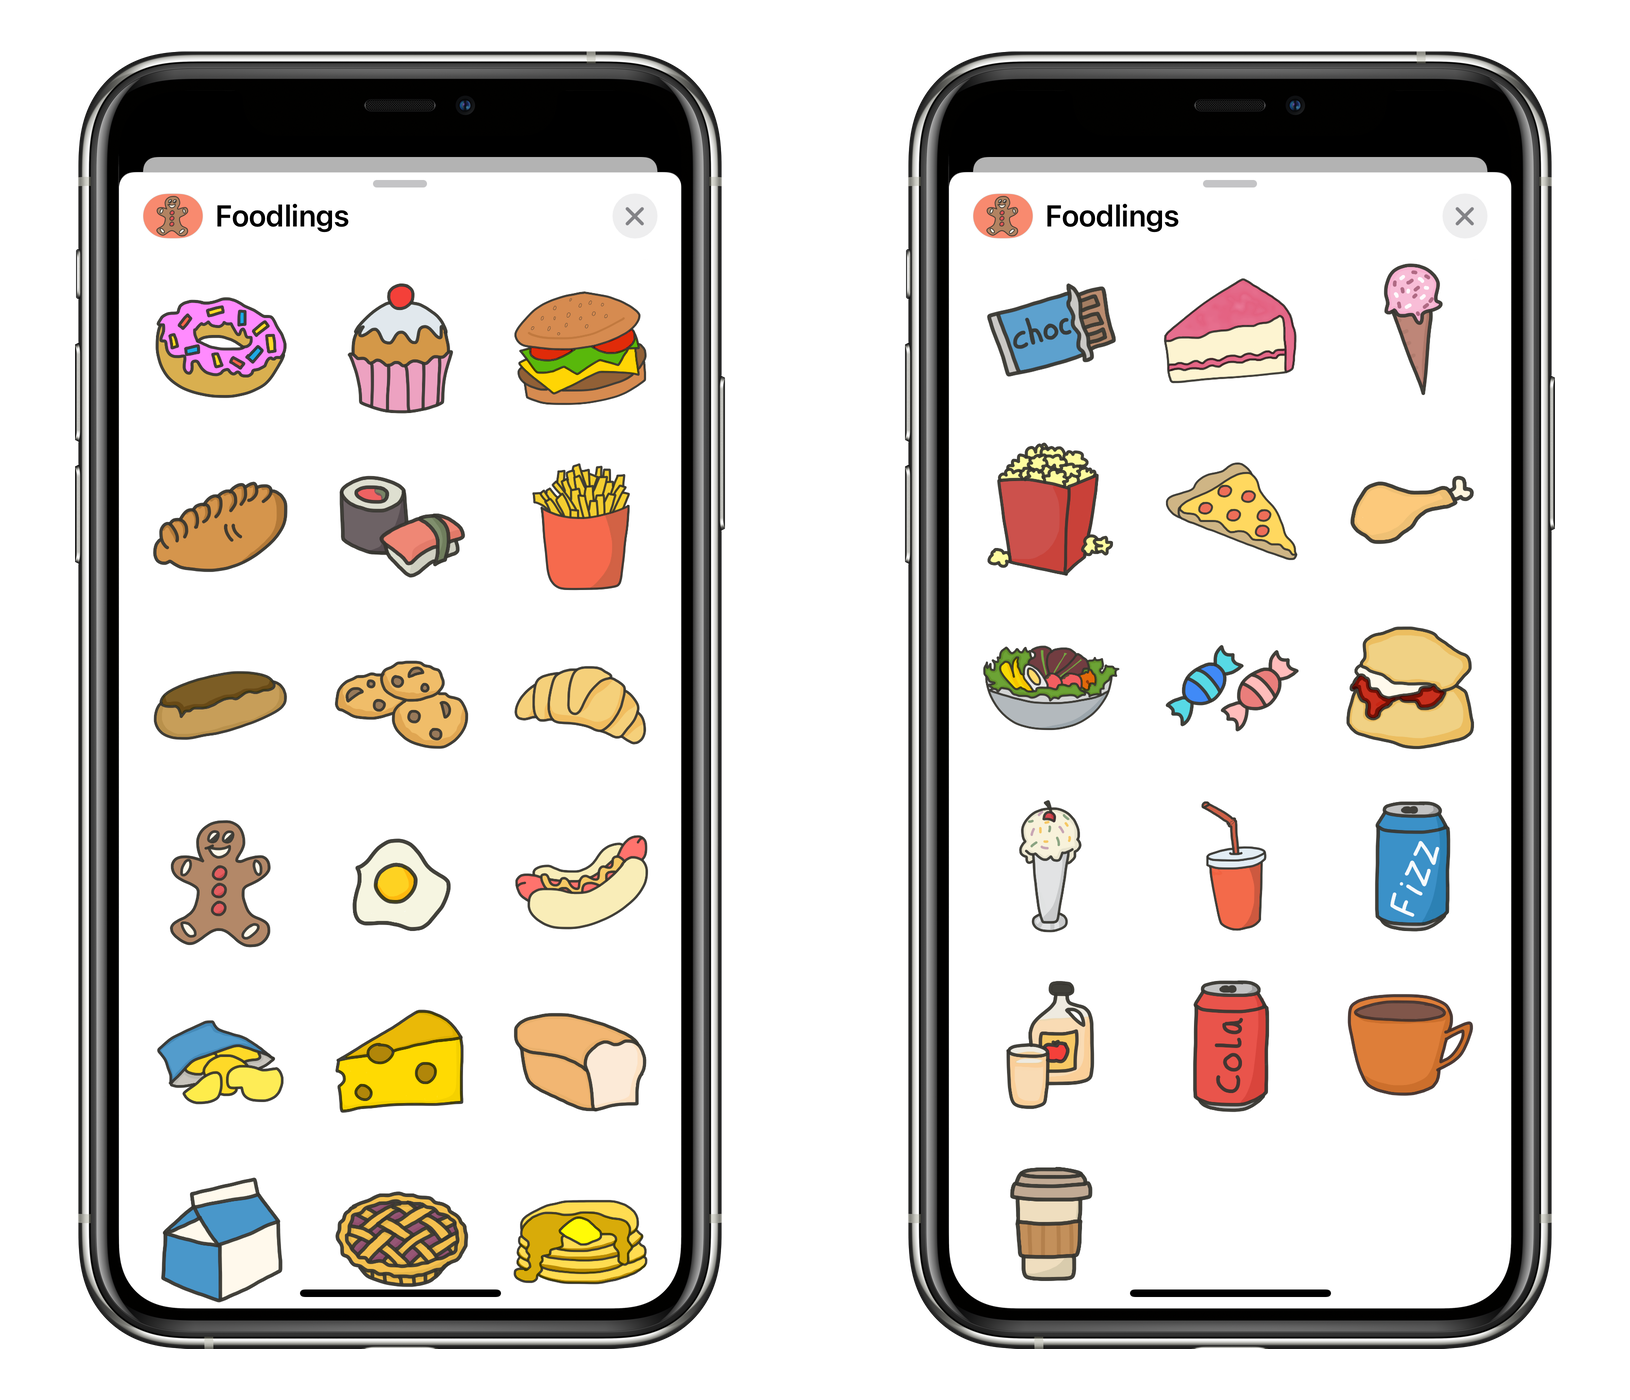 Foodlings running on an iPhone, within iMessage